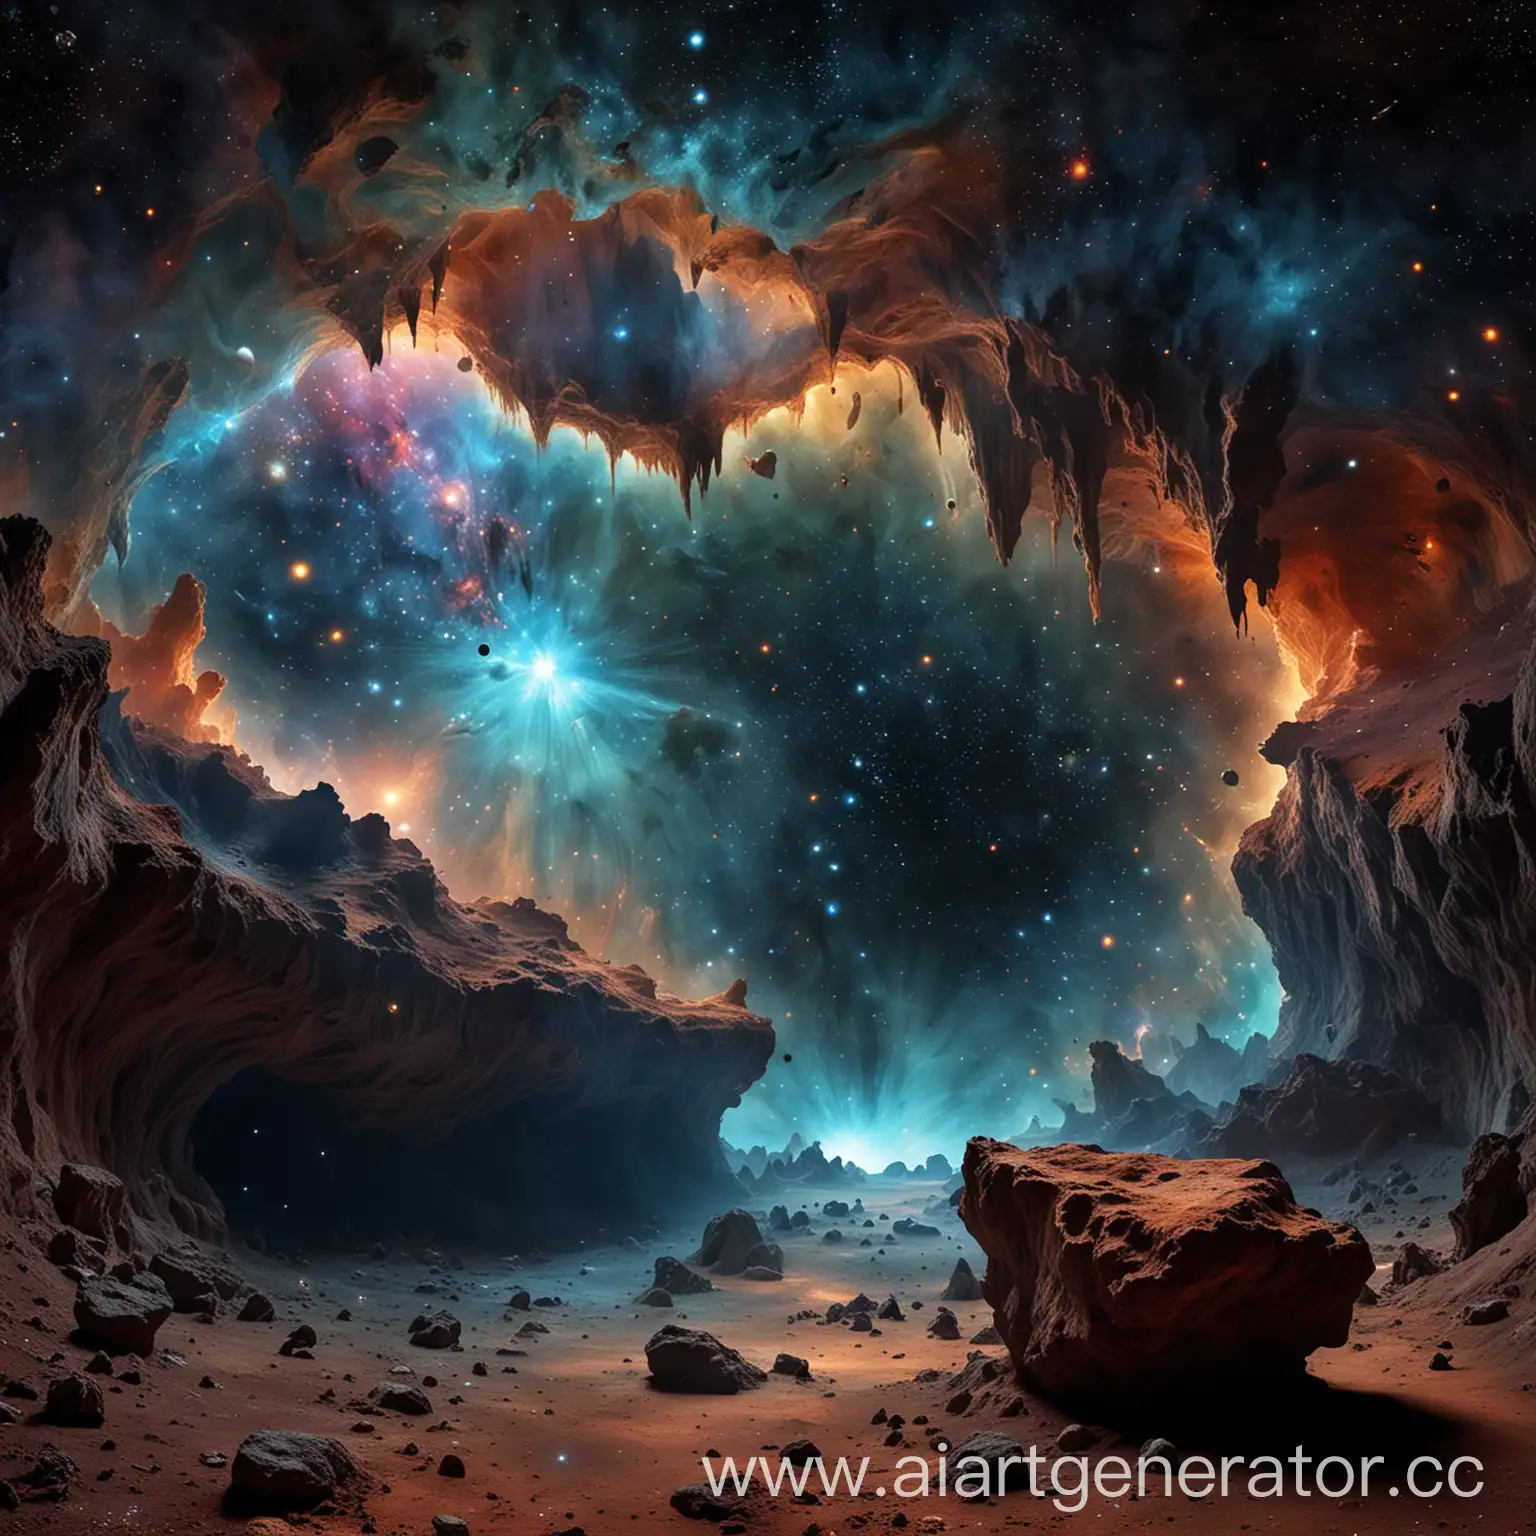 Exploring-a-Mystical-Cave-Amidst-Starry-Nebula-and-Planets